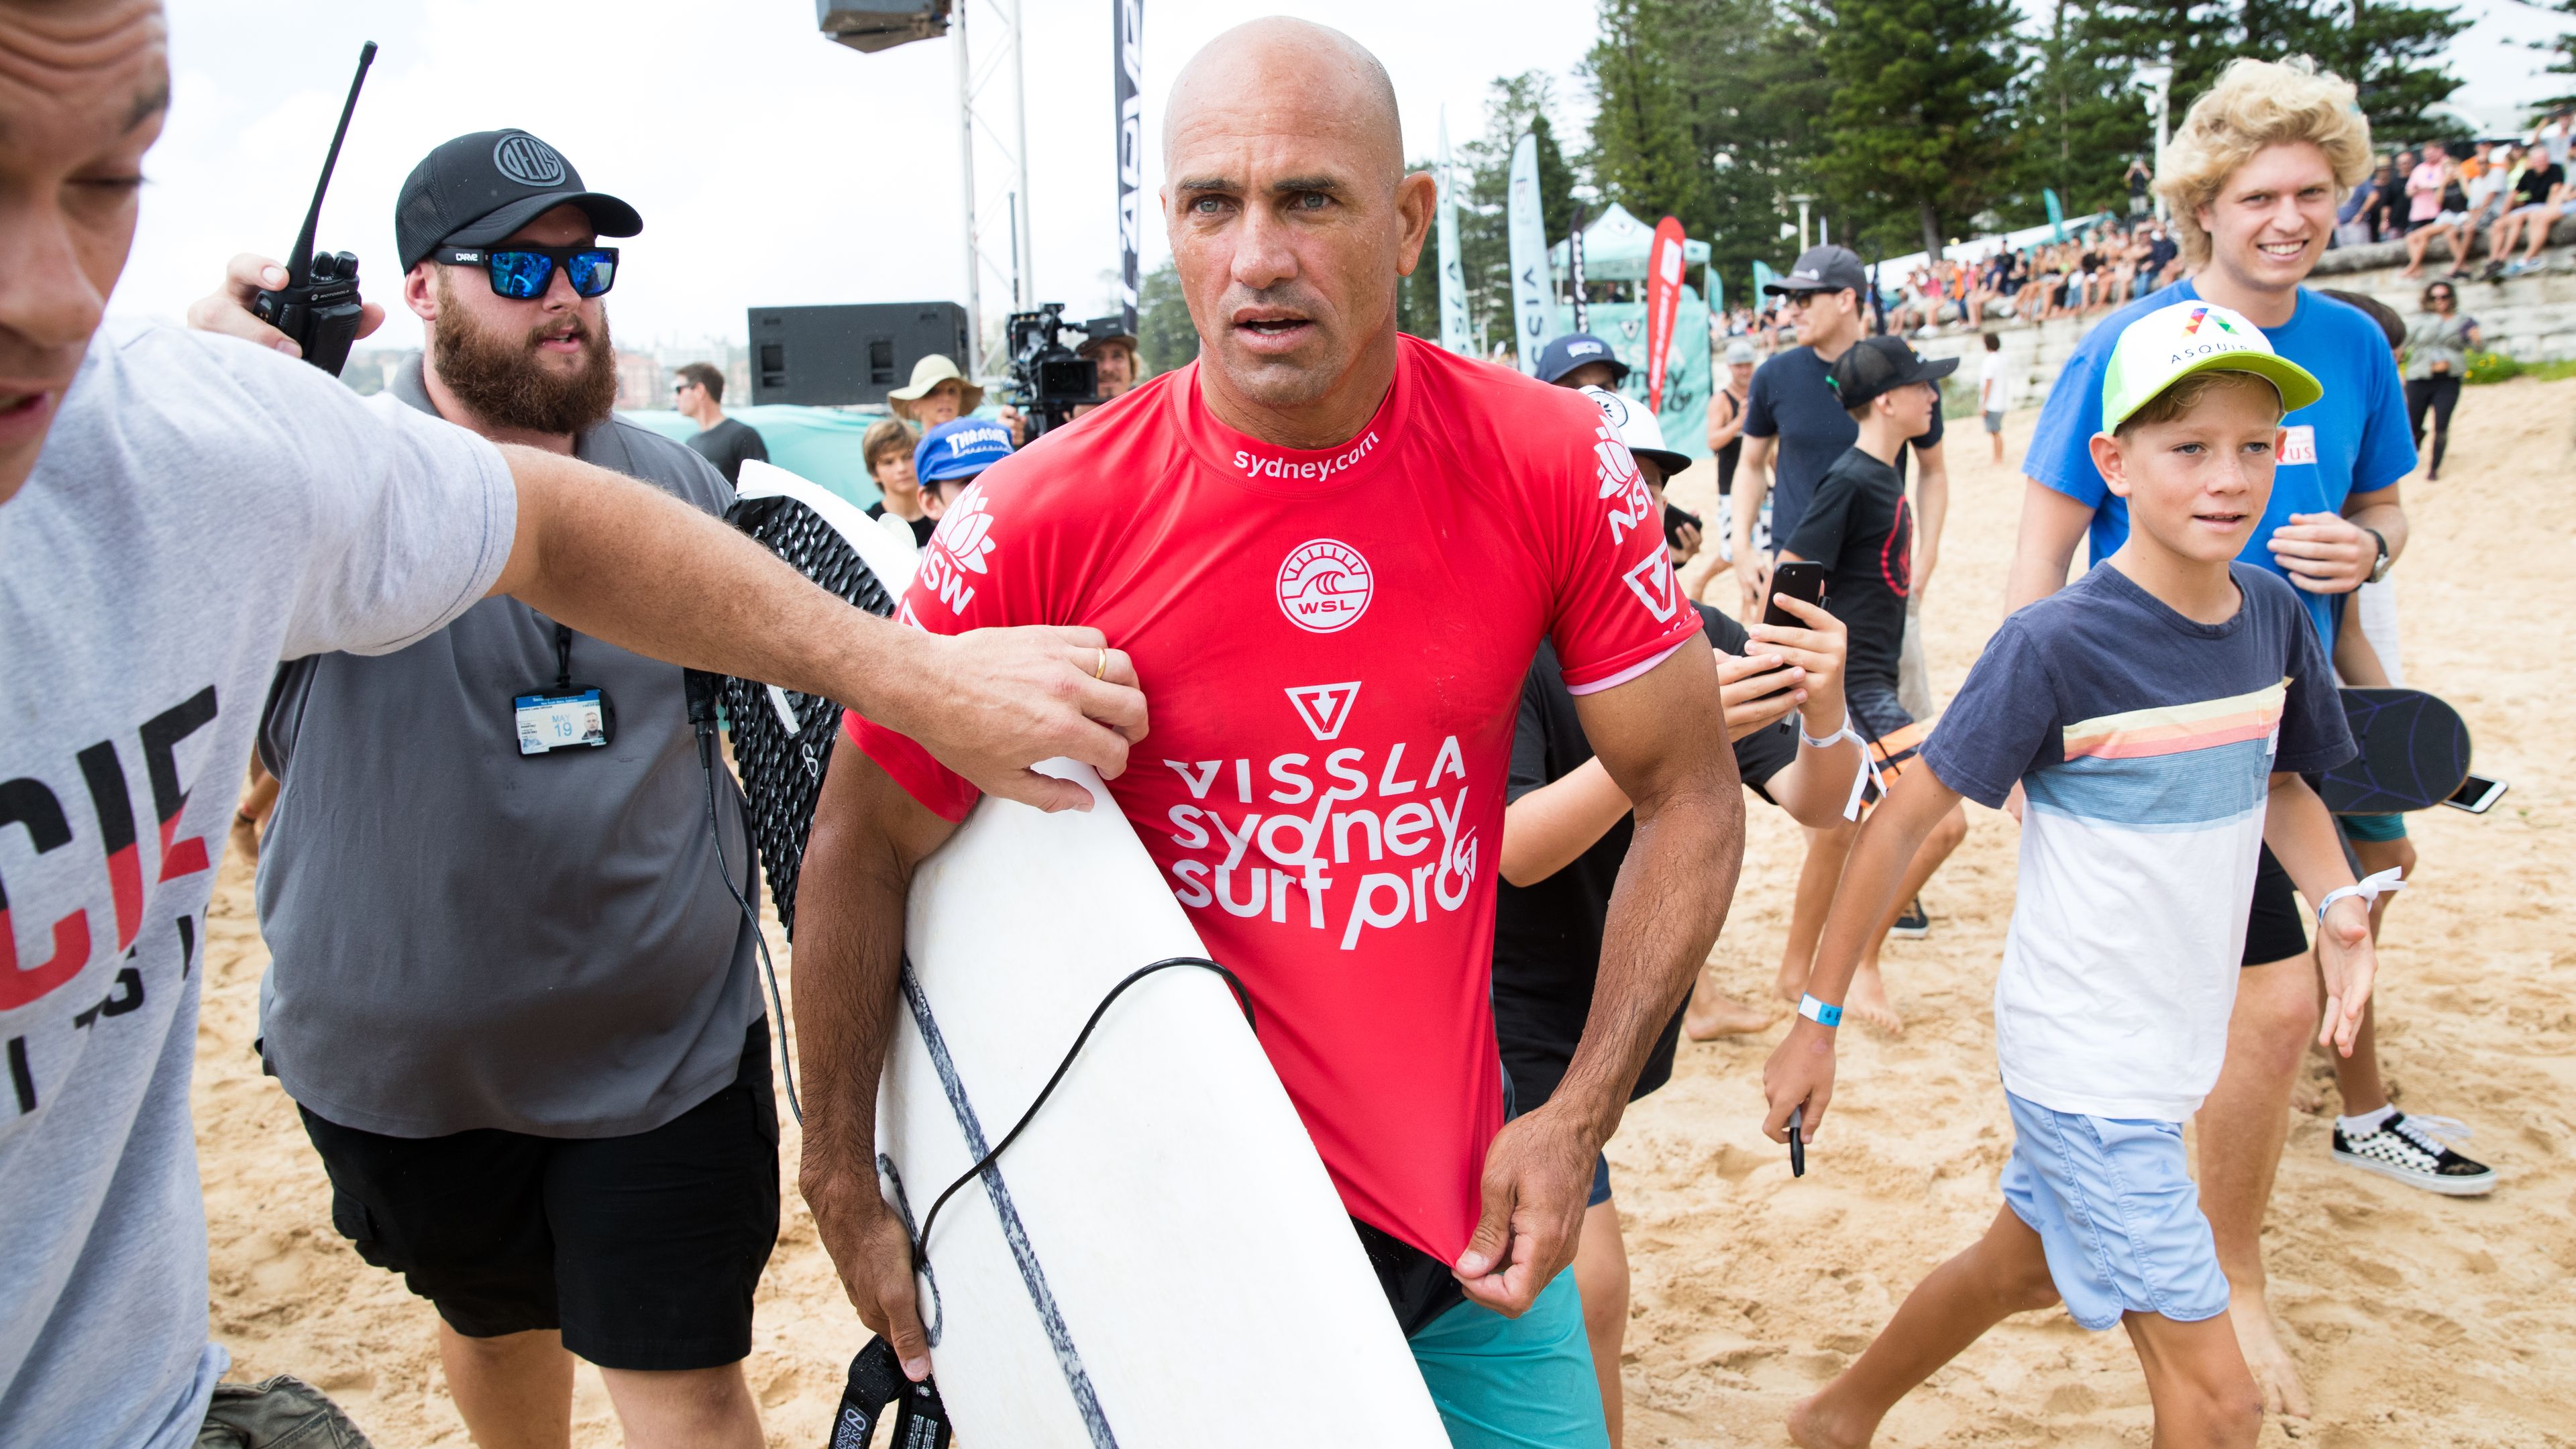 Surfing legend Kelly Slater told he won't be coming into Australia without a COVID-19 vaccination